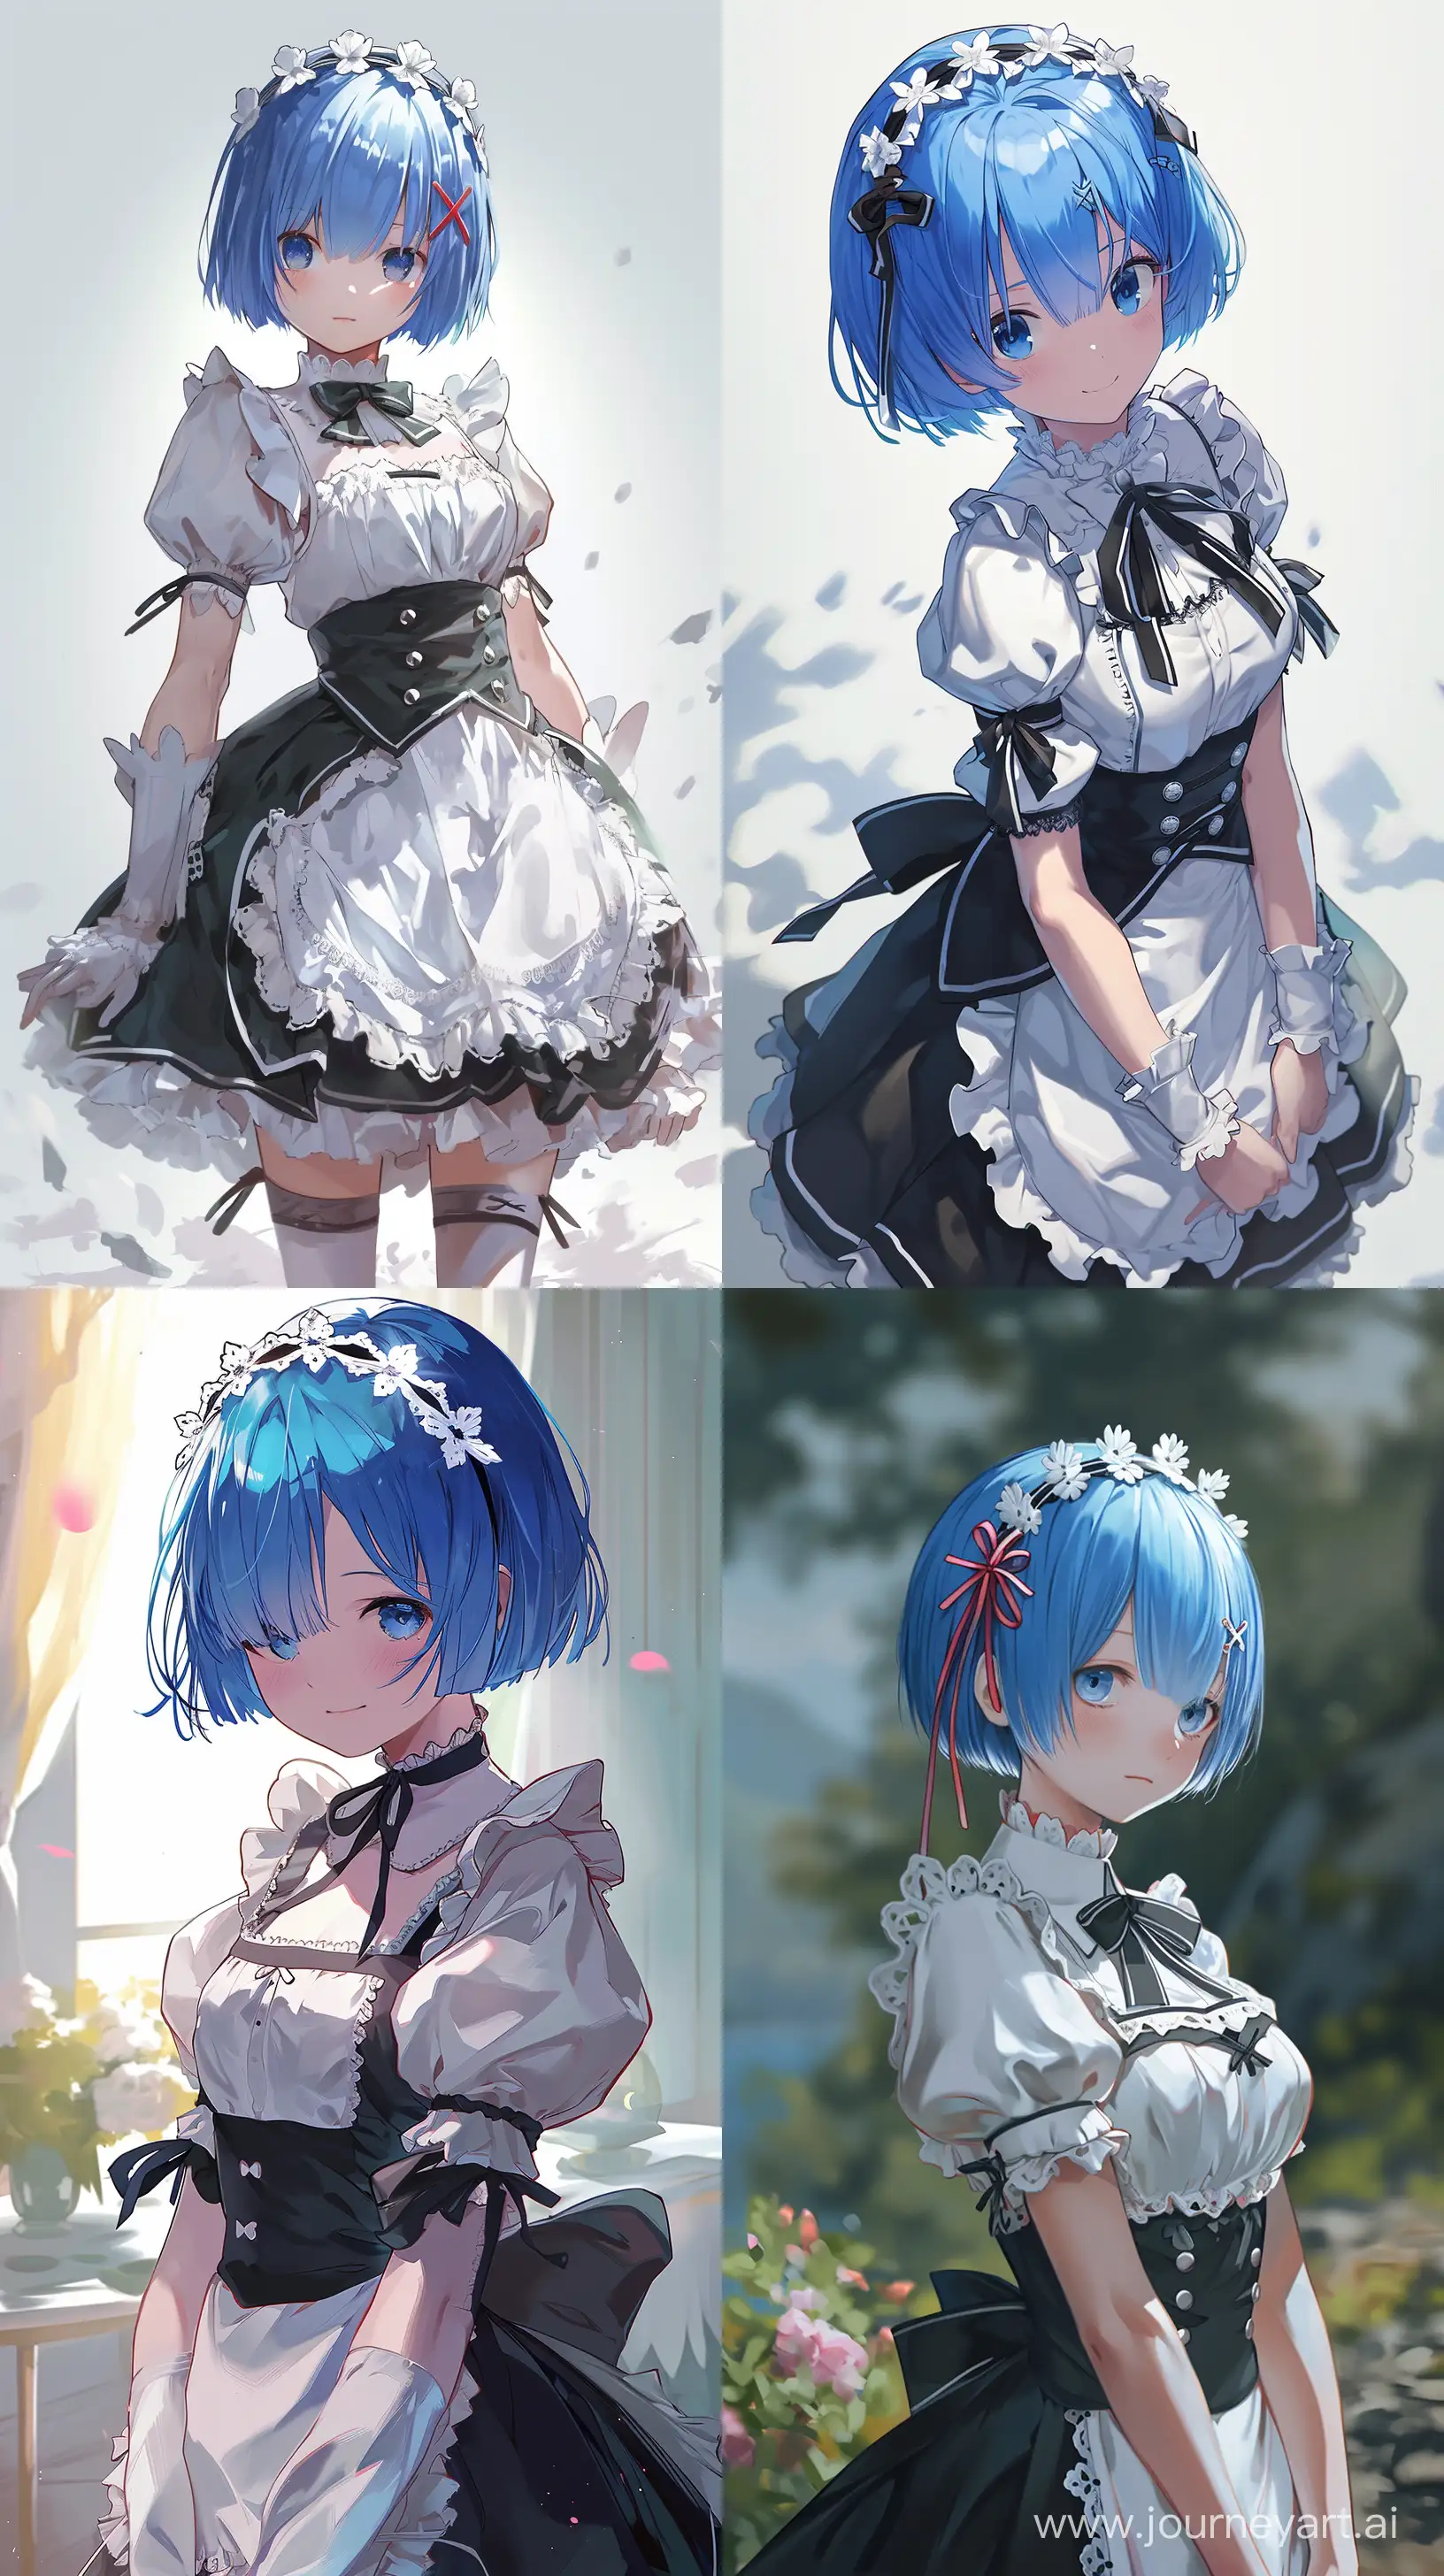 BlueHaired-Anime-Maid-Artistic-4K-Portrait-with-Housemaid-Attire